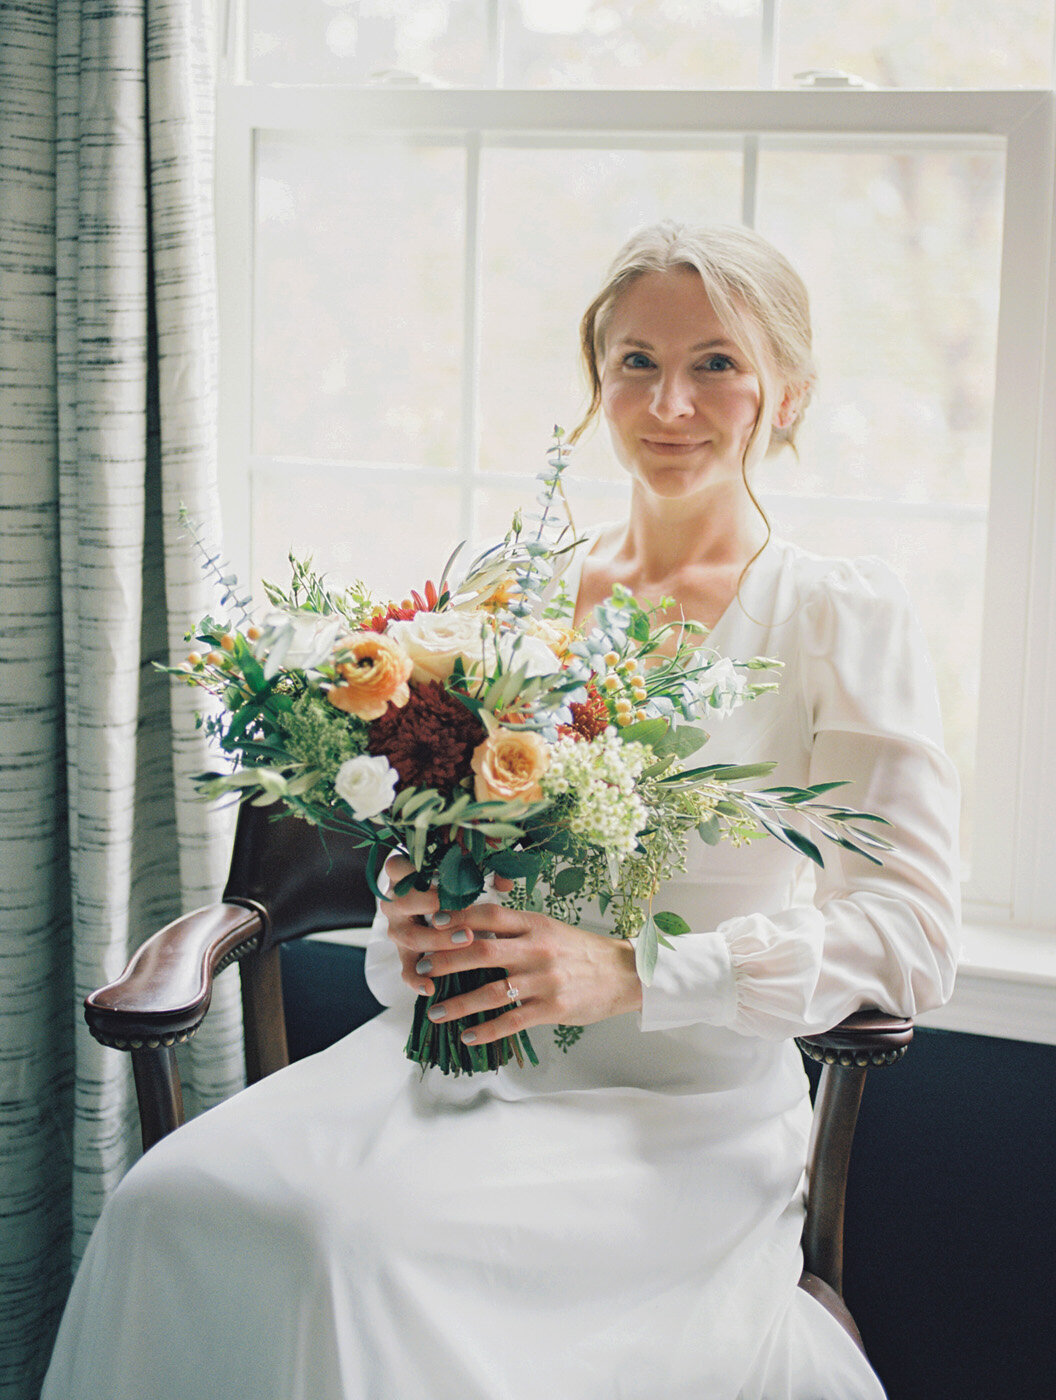 Raleigh Event Elopement Photographer | Jessica Agee Photography - 006